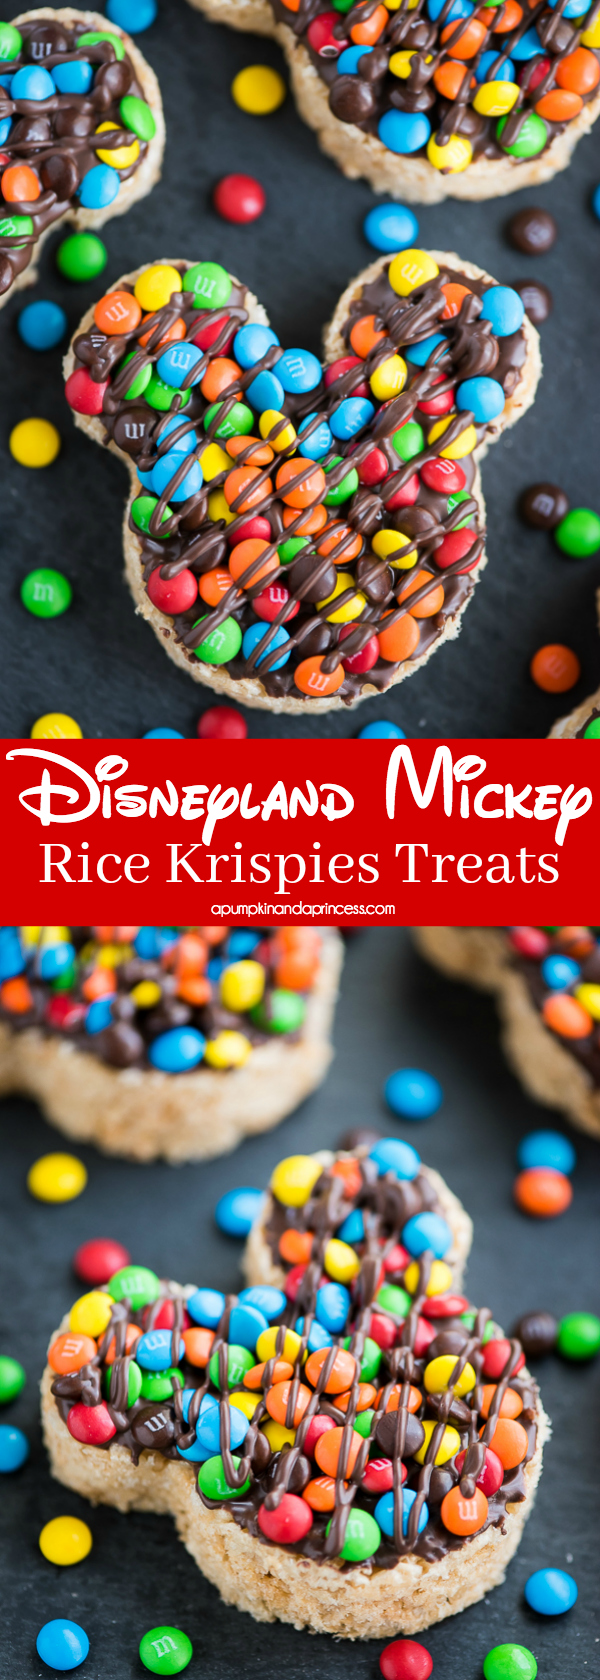 Mickey Rice Krispies Treats – Disneyland inspired Mickey shaped Rice Krispies treats dipped in chocolate and topped with mini M&M’s.